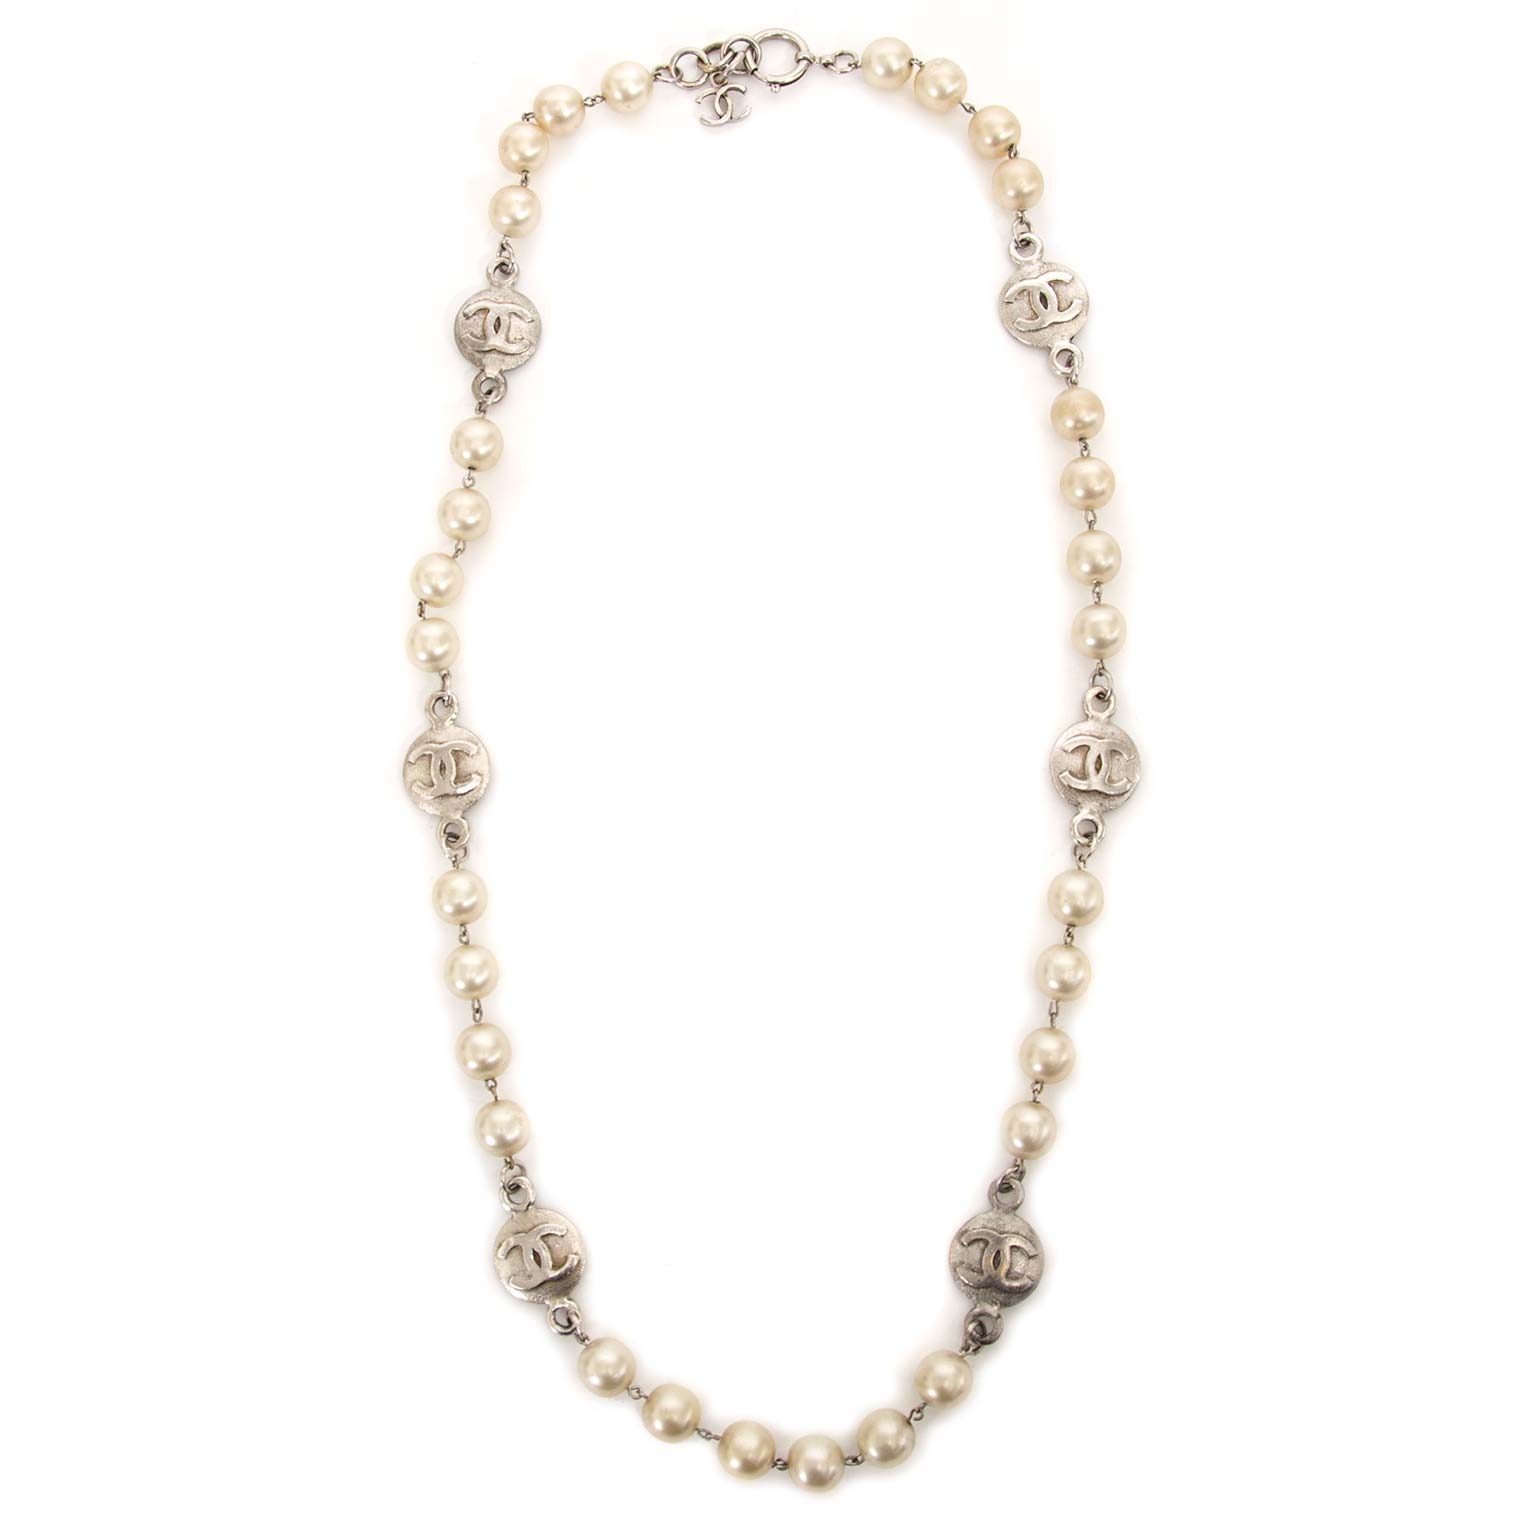 Vintage Chanel Replica Huge Faux Pearl Necklace  Partial Payment   Danilova Fashion costume and vintage jewellery curator